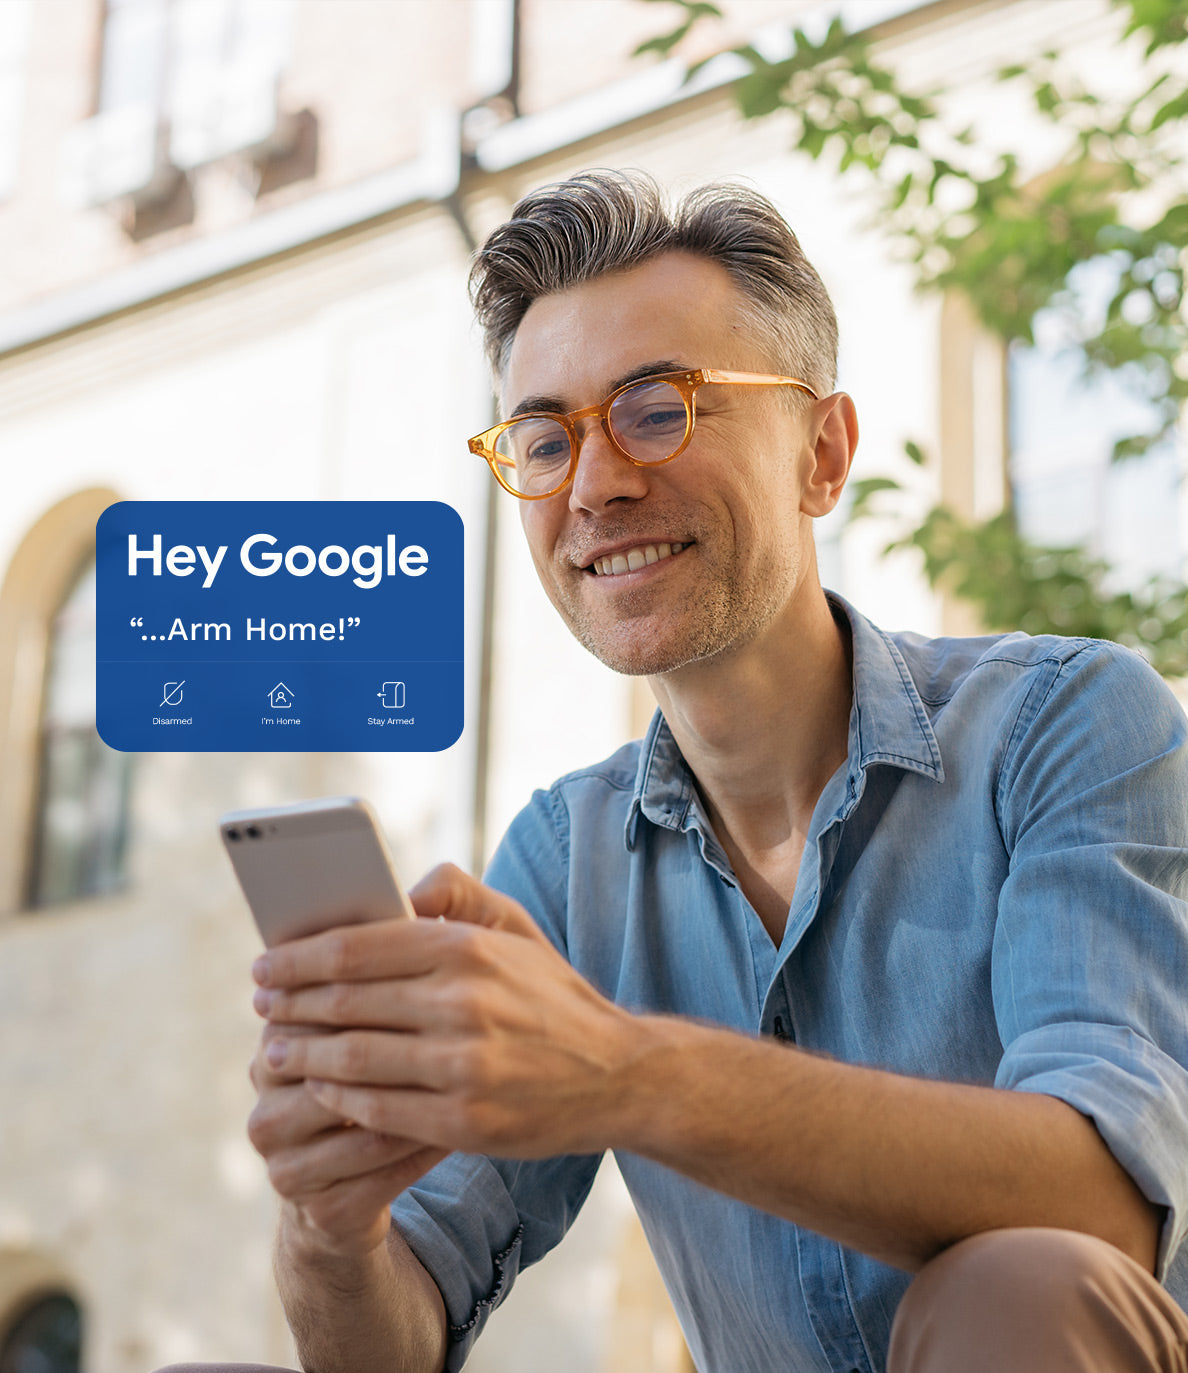 Smiling-middle-aged-man-with-glasses-using-apple-mobile-device-to-arm-home-burglar-system-with-voice-prompt